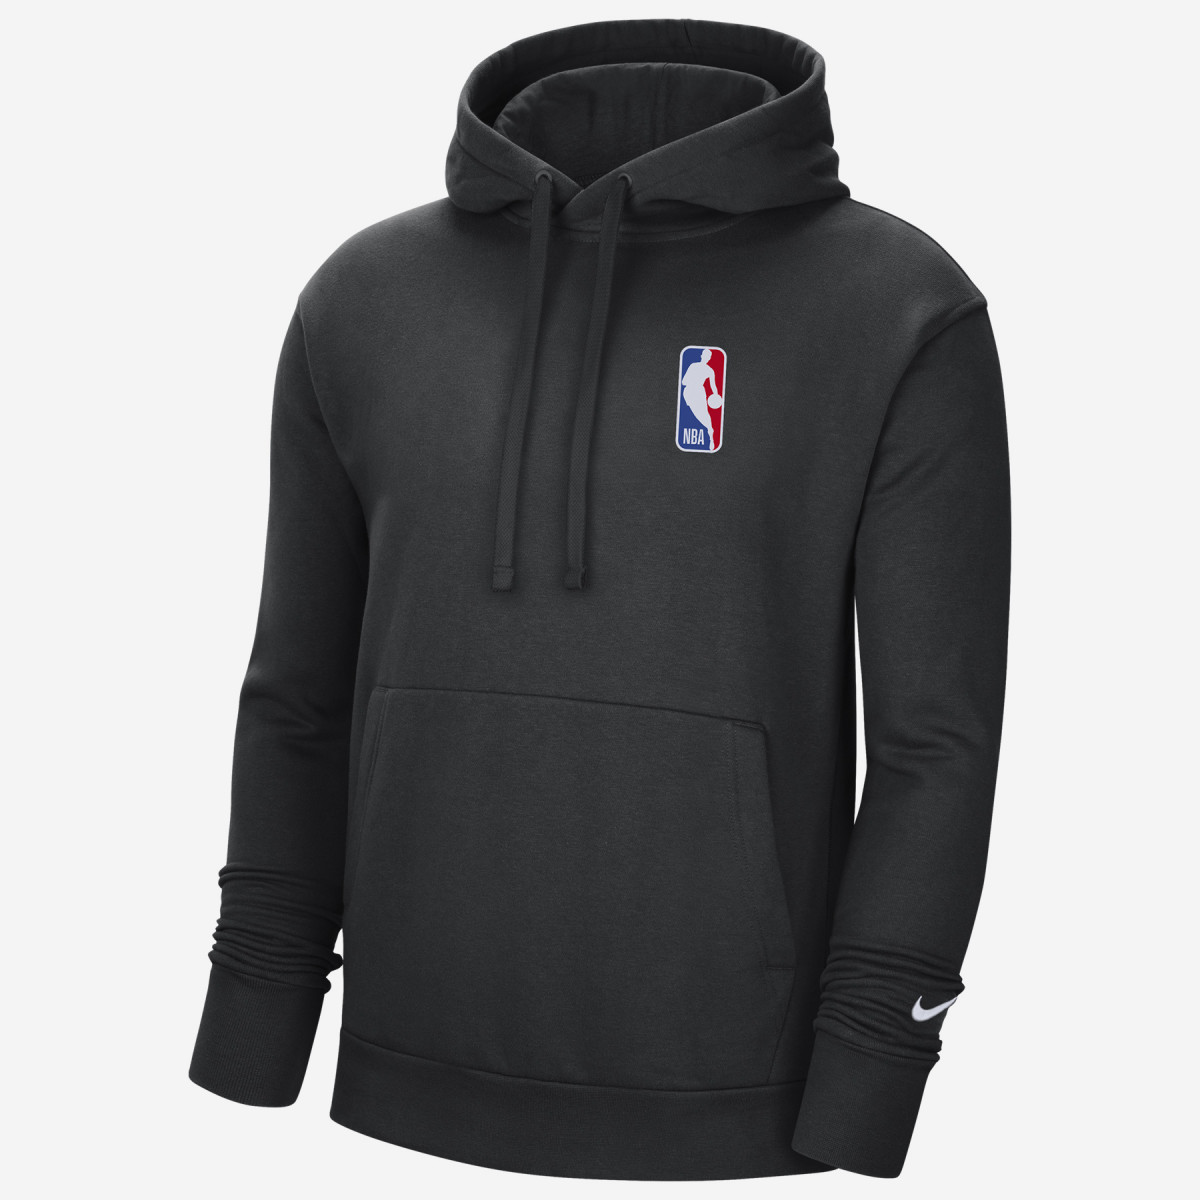 NBA Logo Hoodie Gift For Men - Fashions Fade, Style Is Eternal